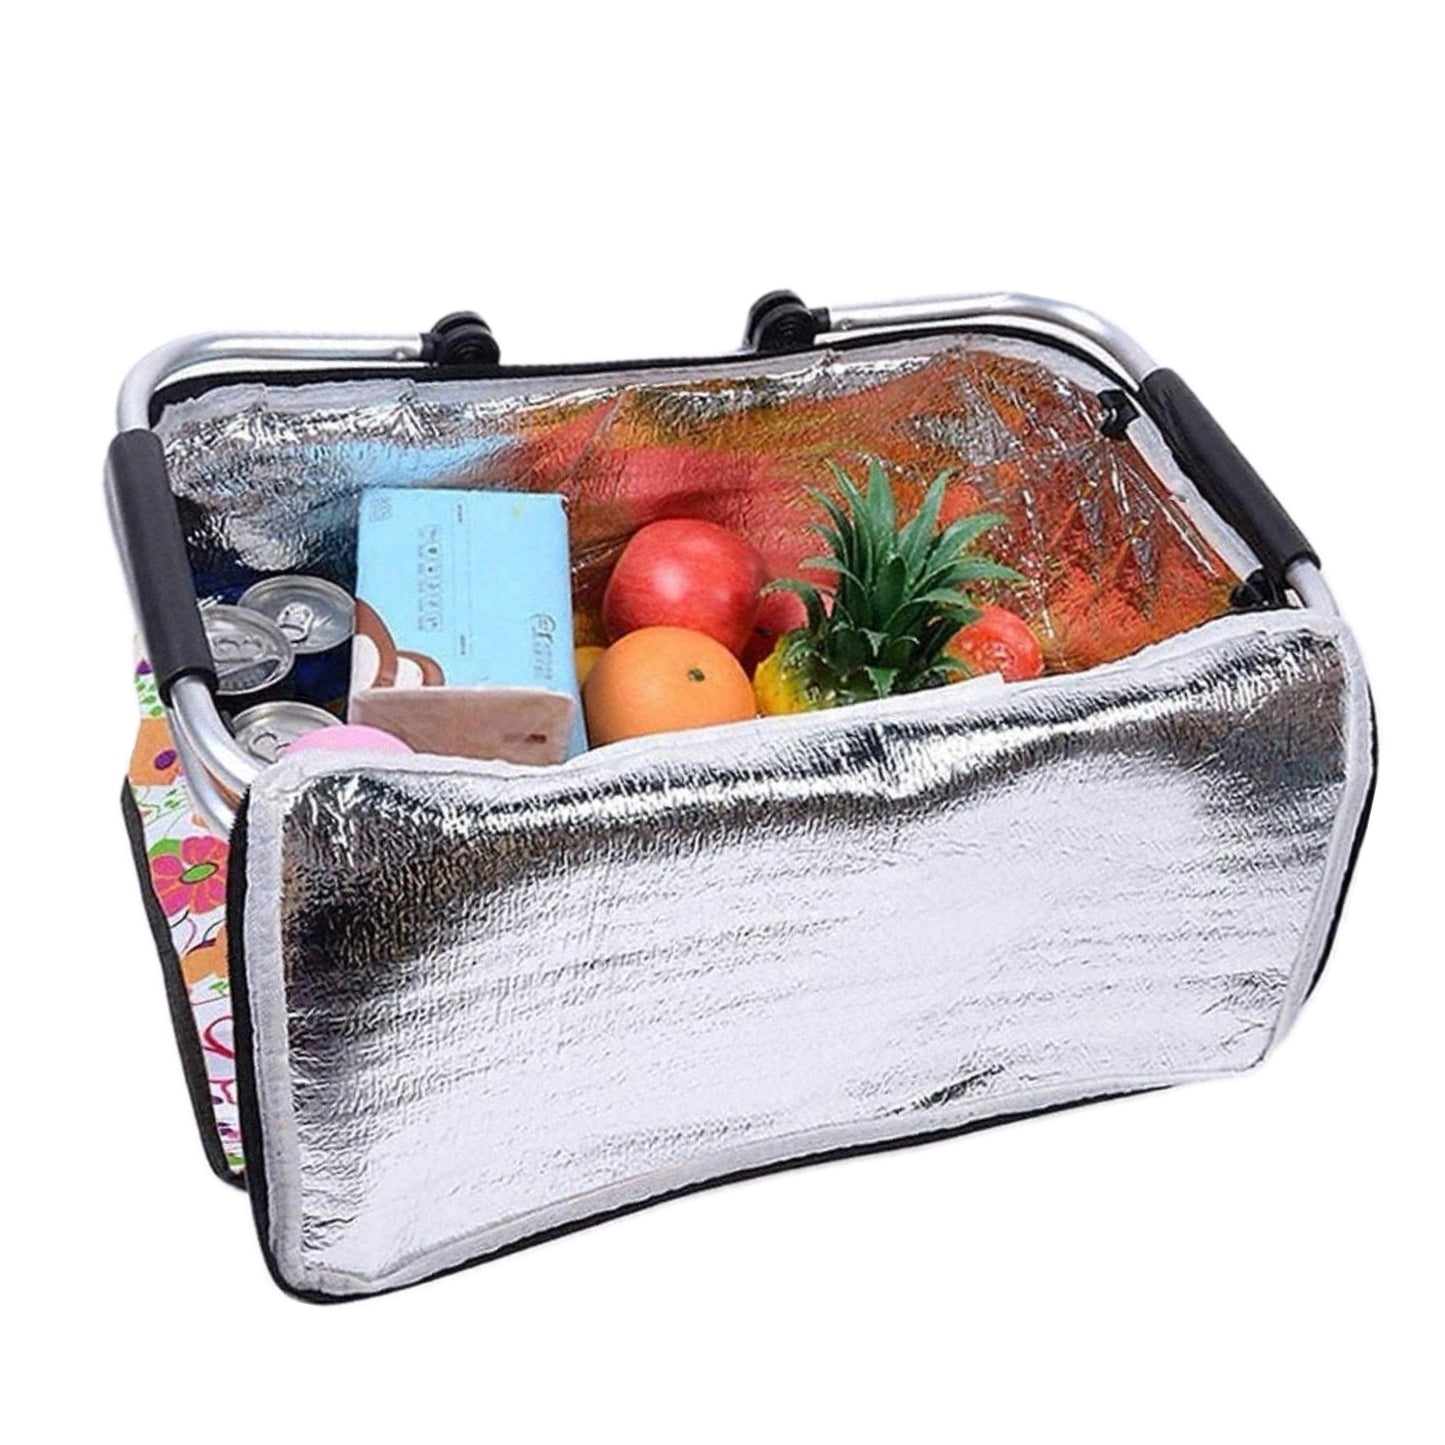 Insulated Travel Basket - Picnic Basket (Red)